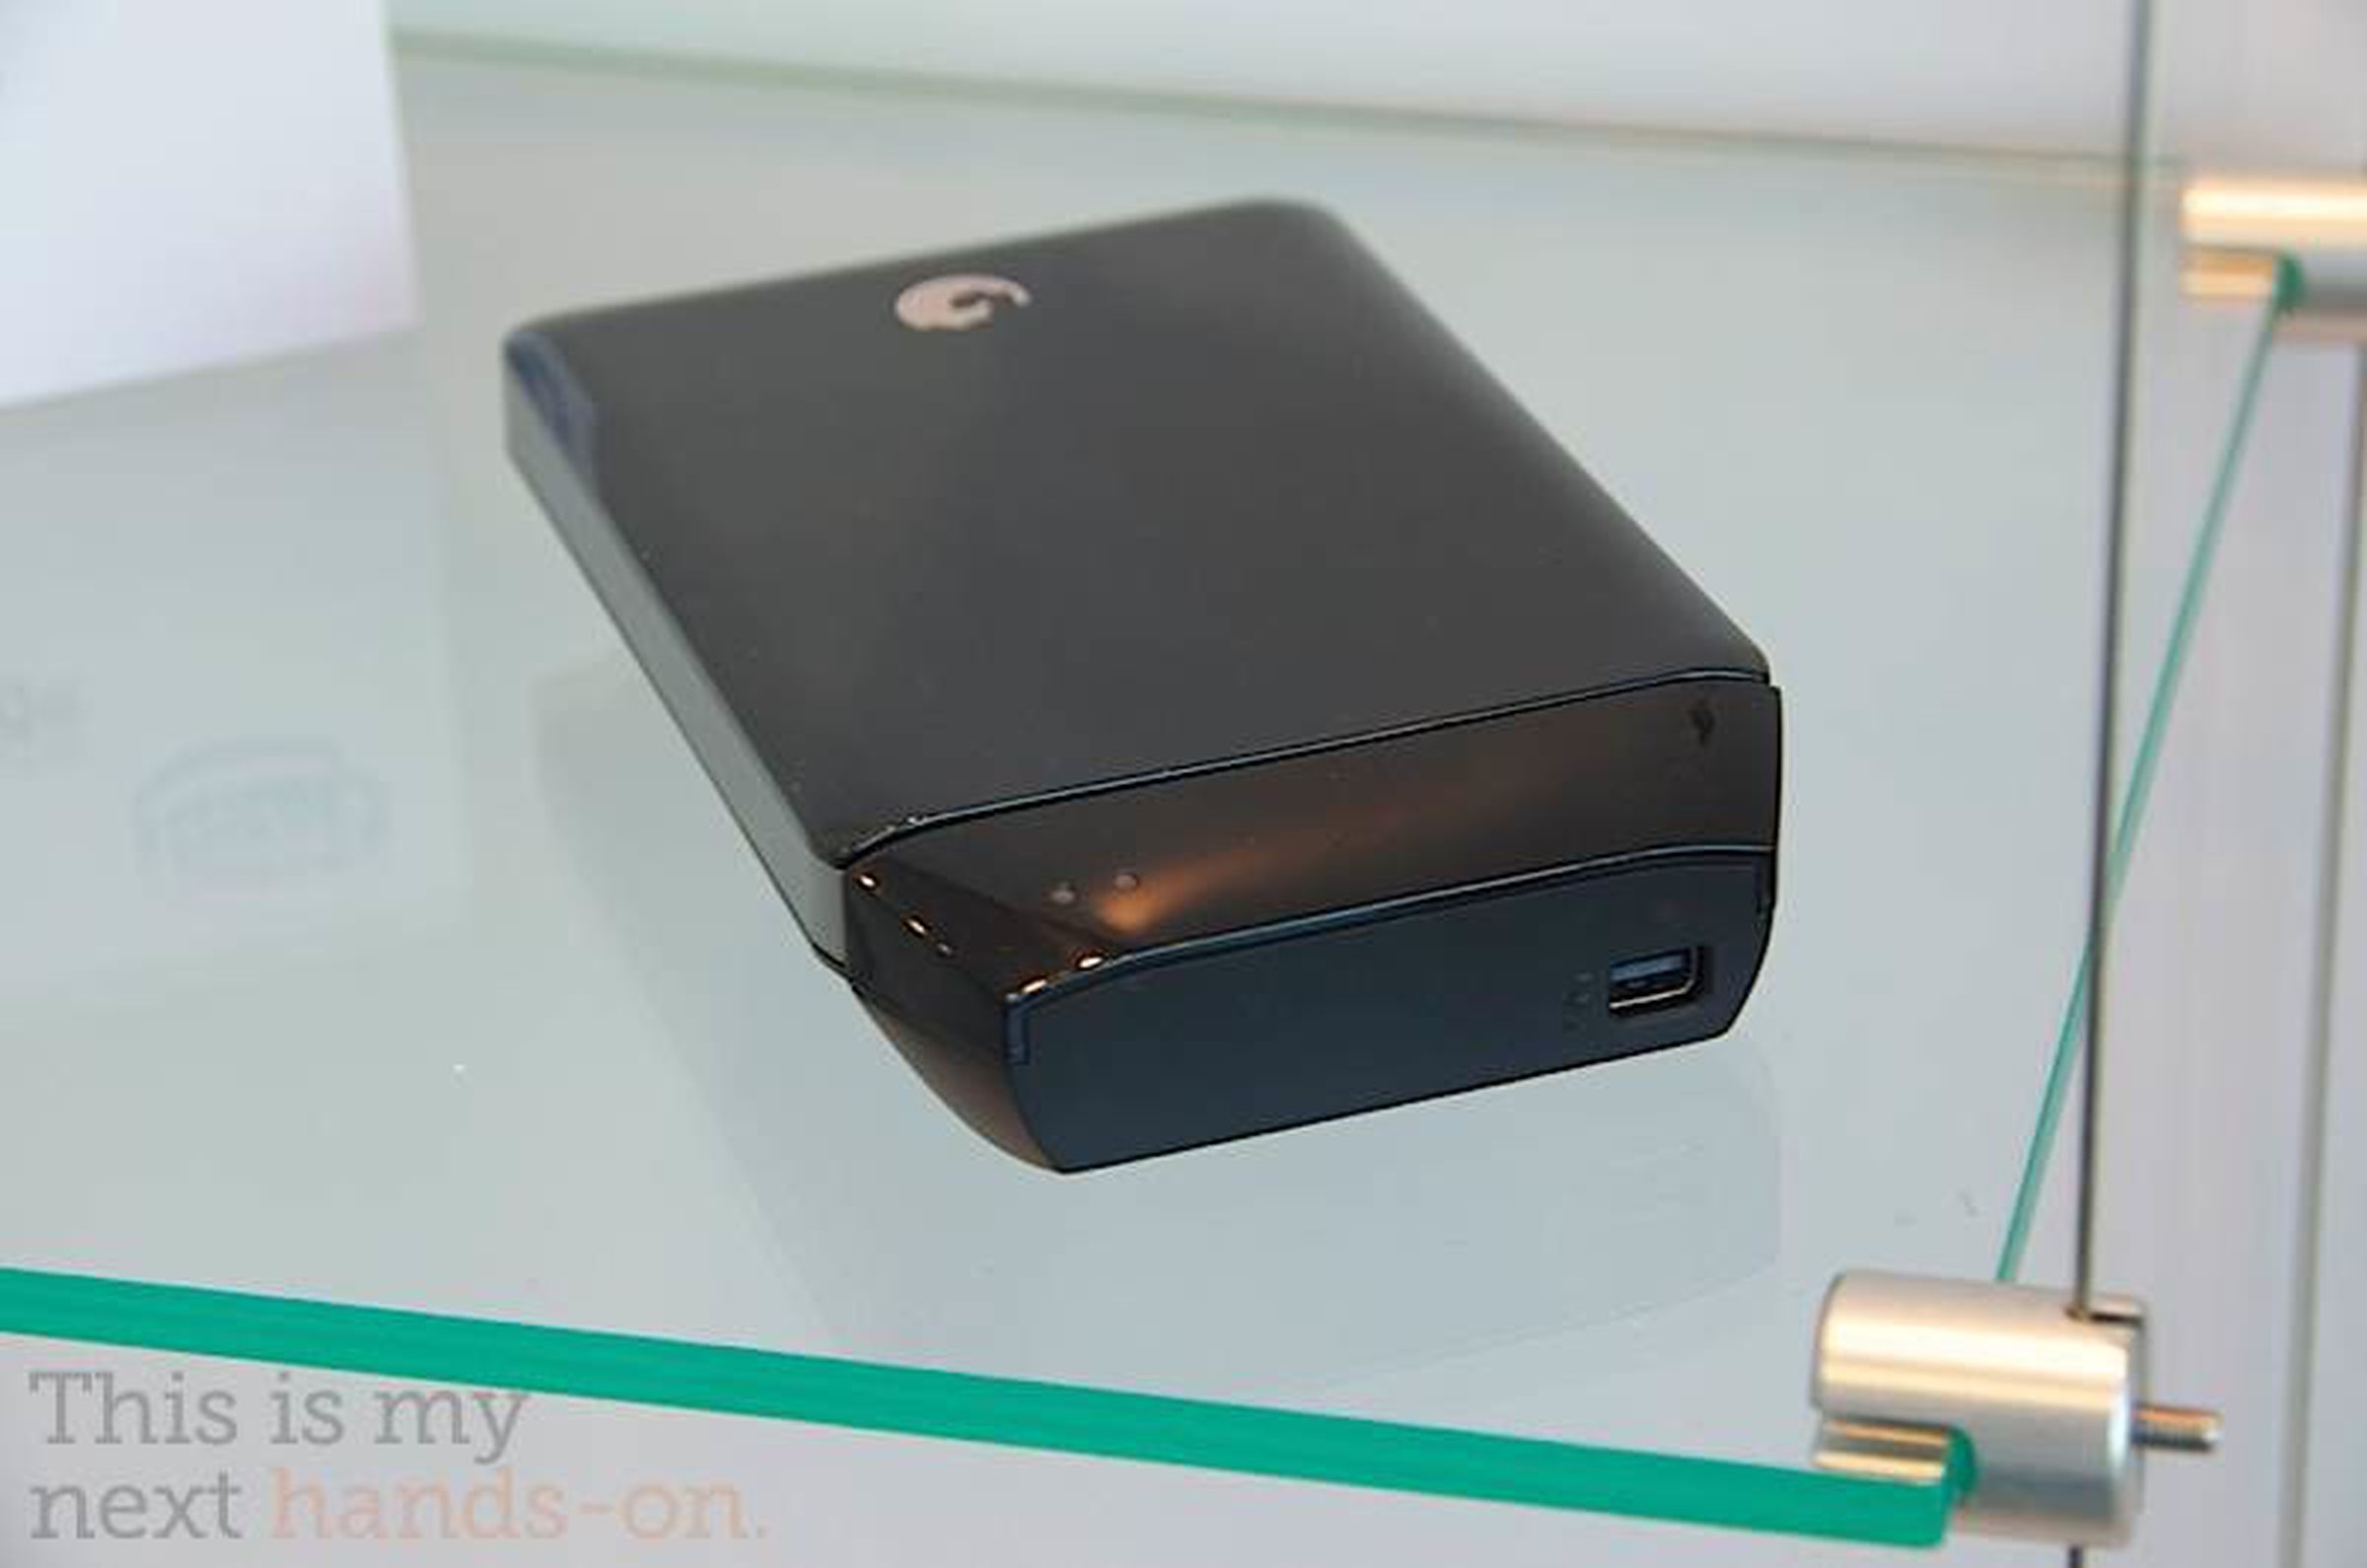 Belkin Express Dock, PCI-E expansion, and Seagate GoFlex adapter photos